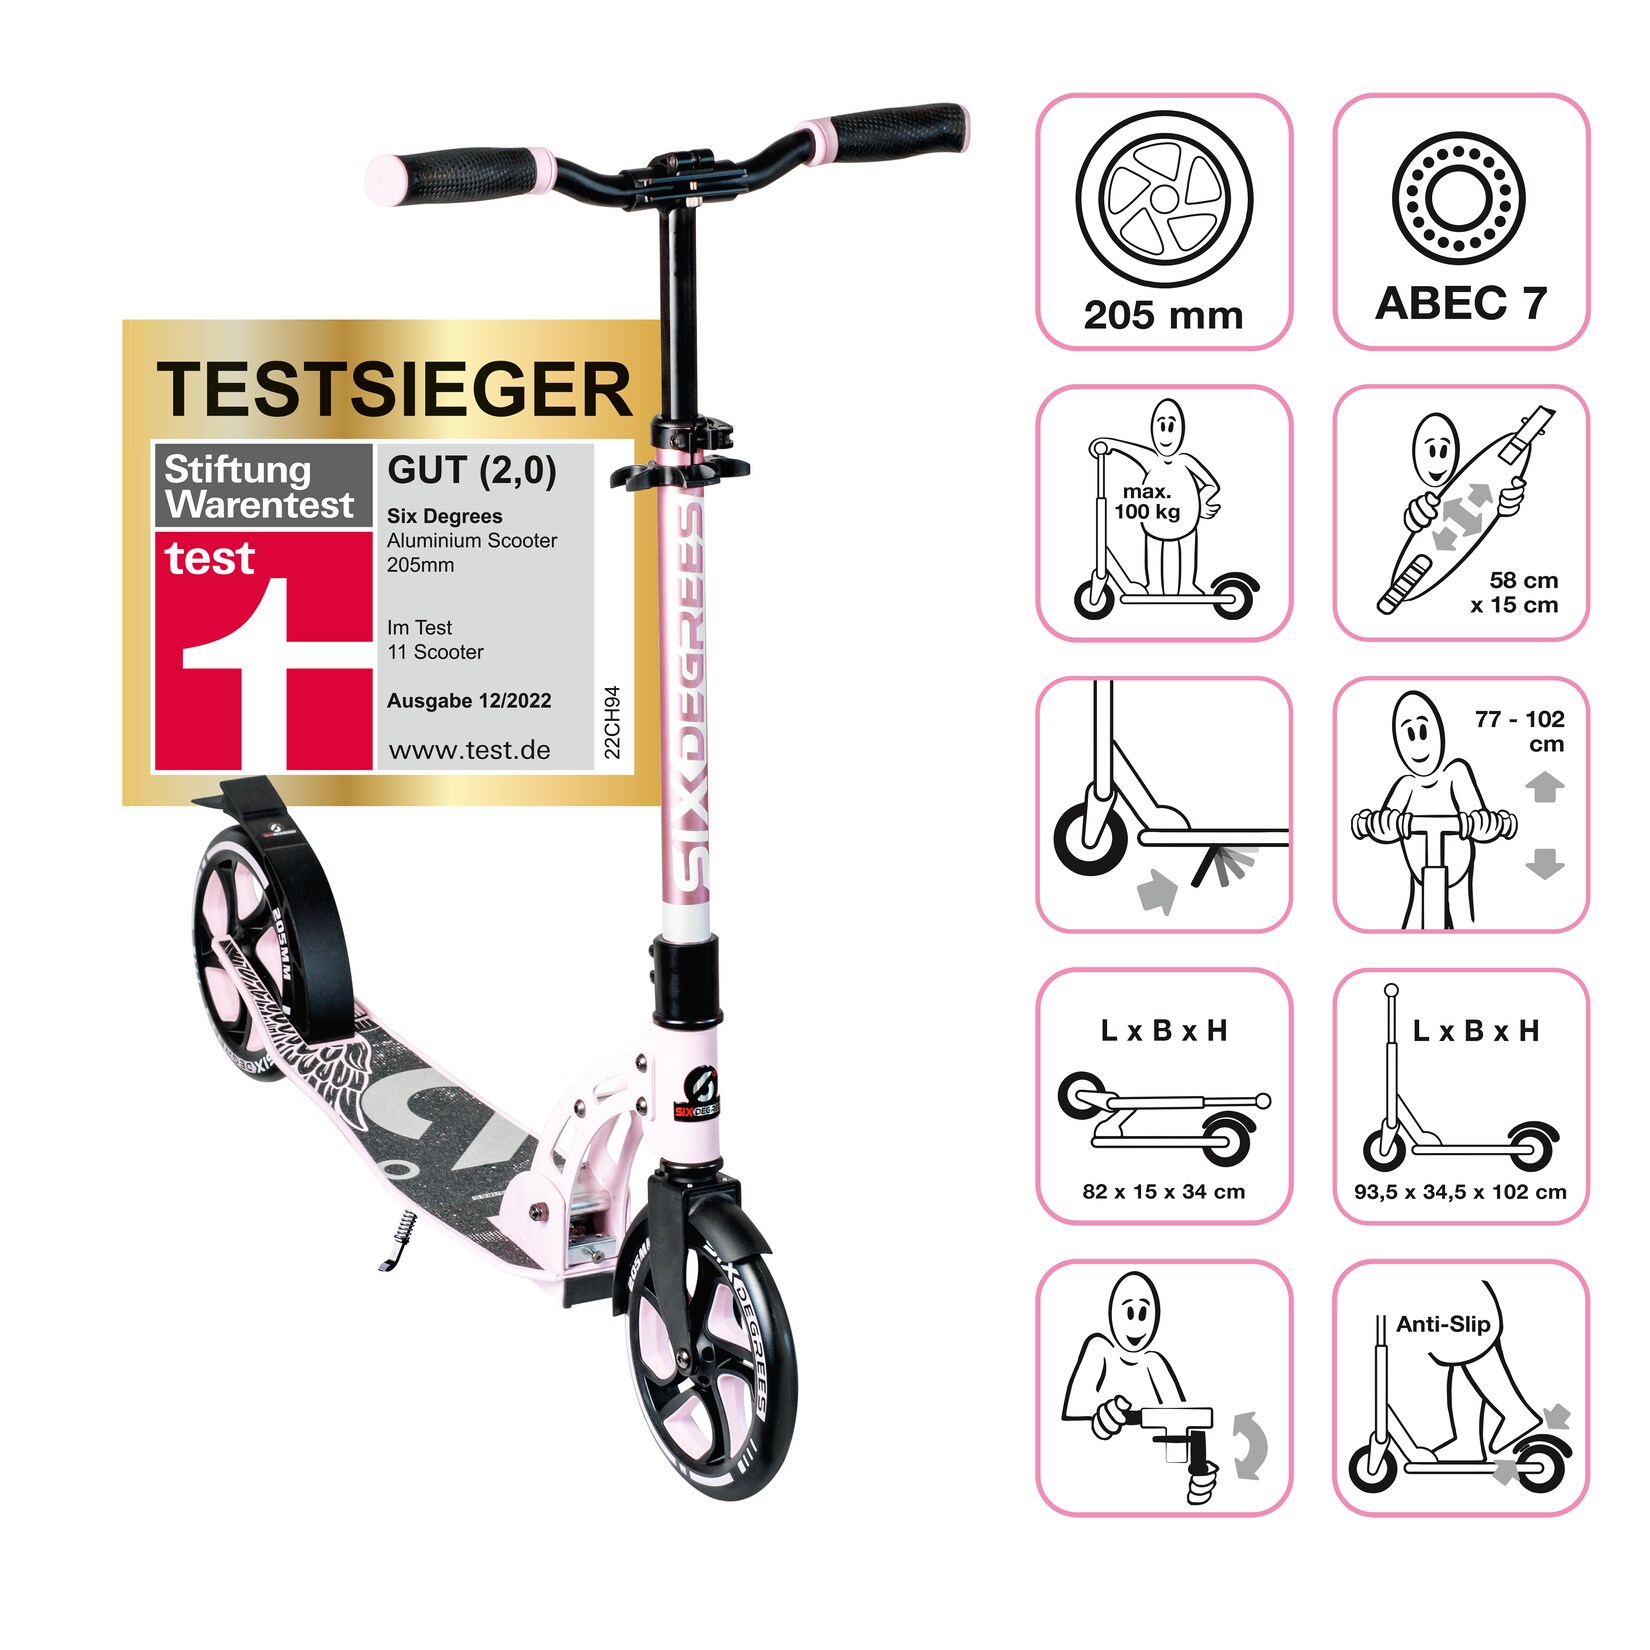 SIX DEGREES Aluminium Scooter 205 mm pastell-pink